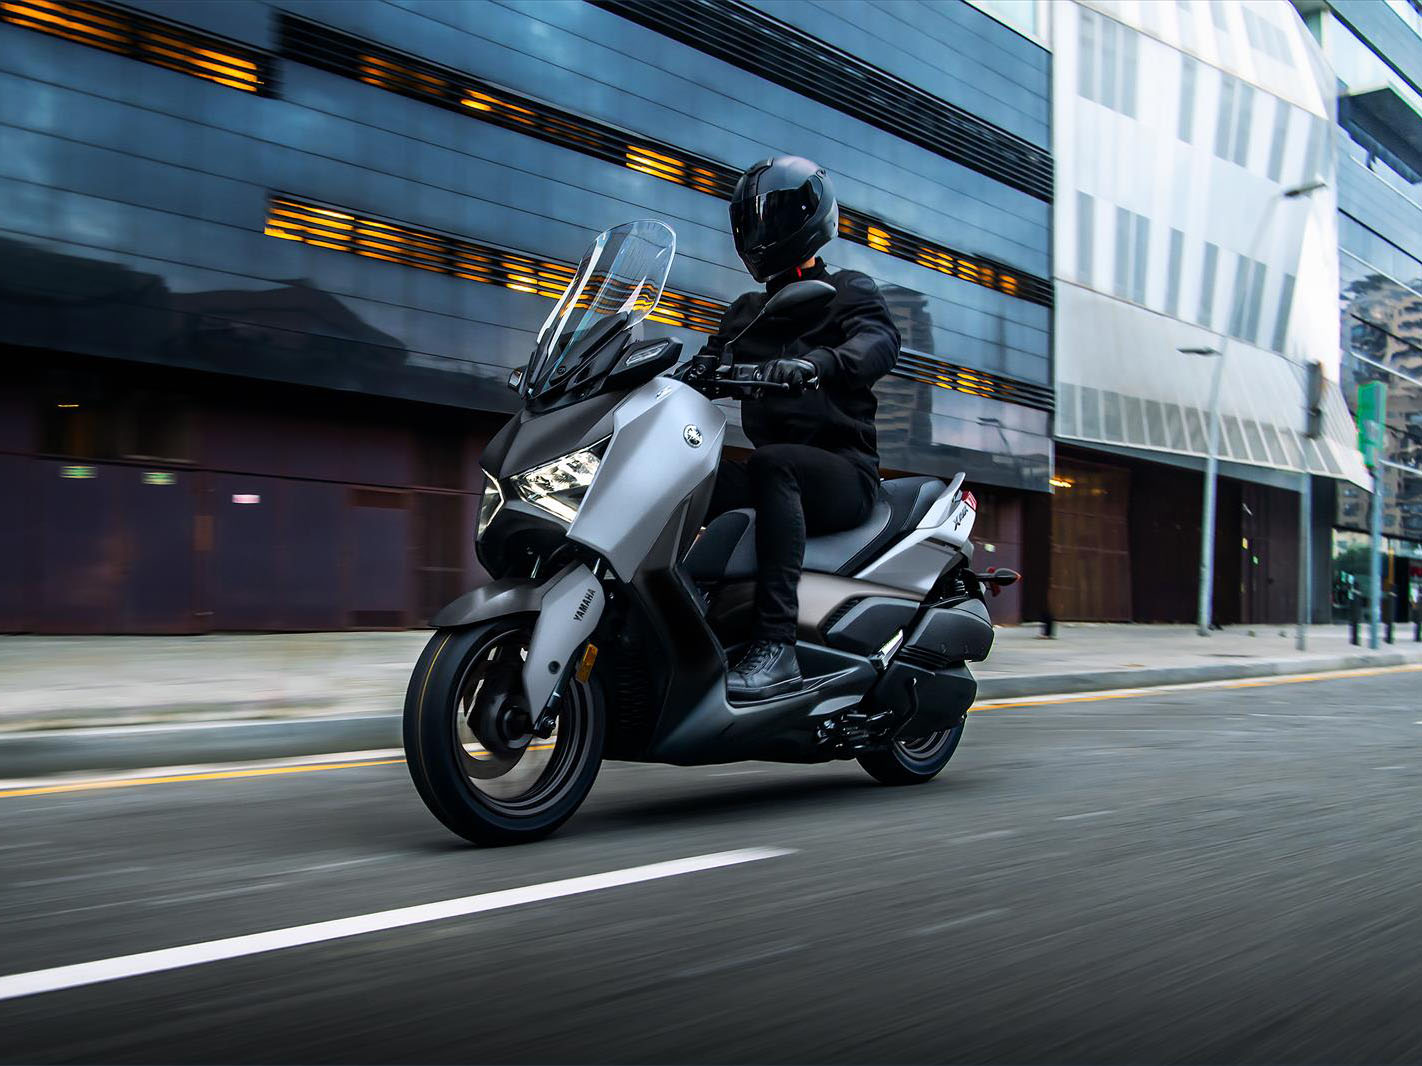 2023 Yamaha XMAX in Middletown, New York - Photo 15